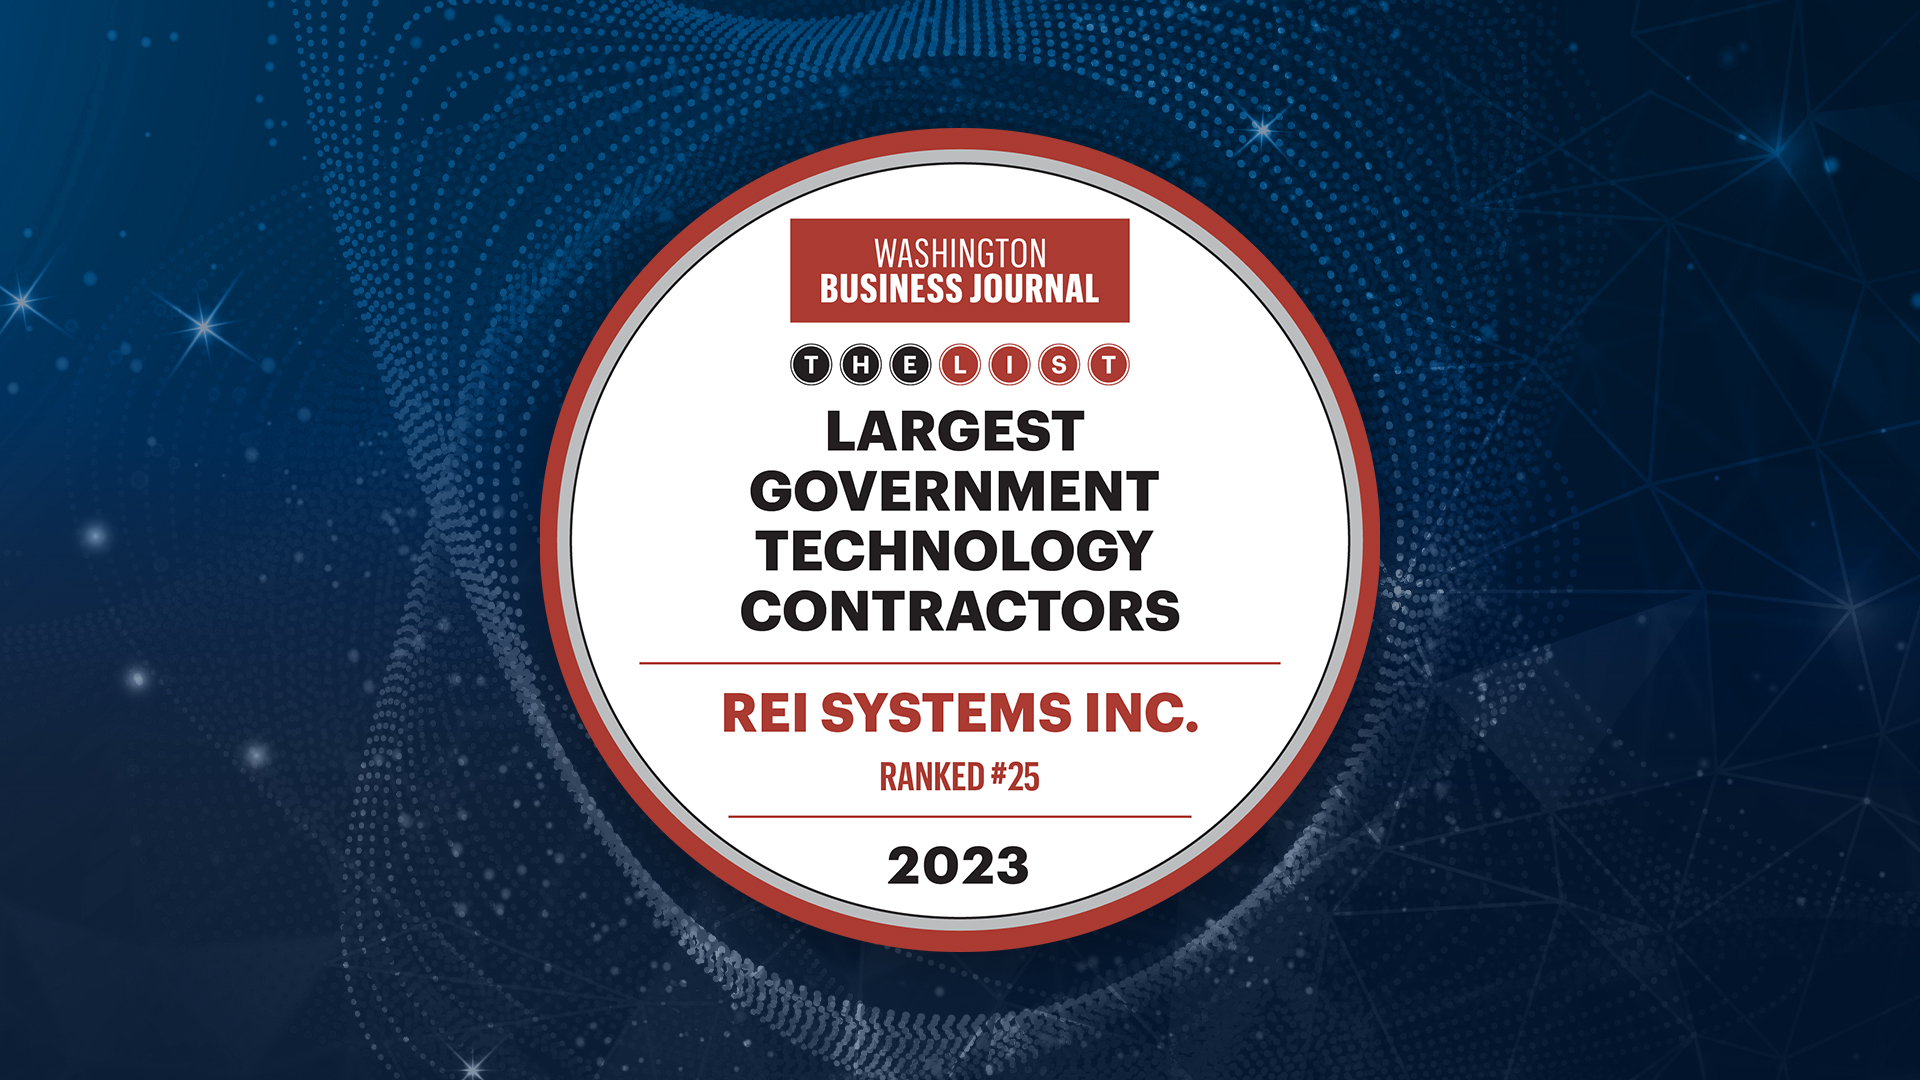 REI Systems Coasts to Number 25 on Washington Business Journal’s Government Technology Contractor List